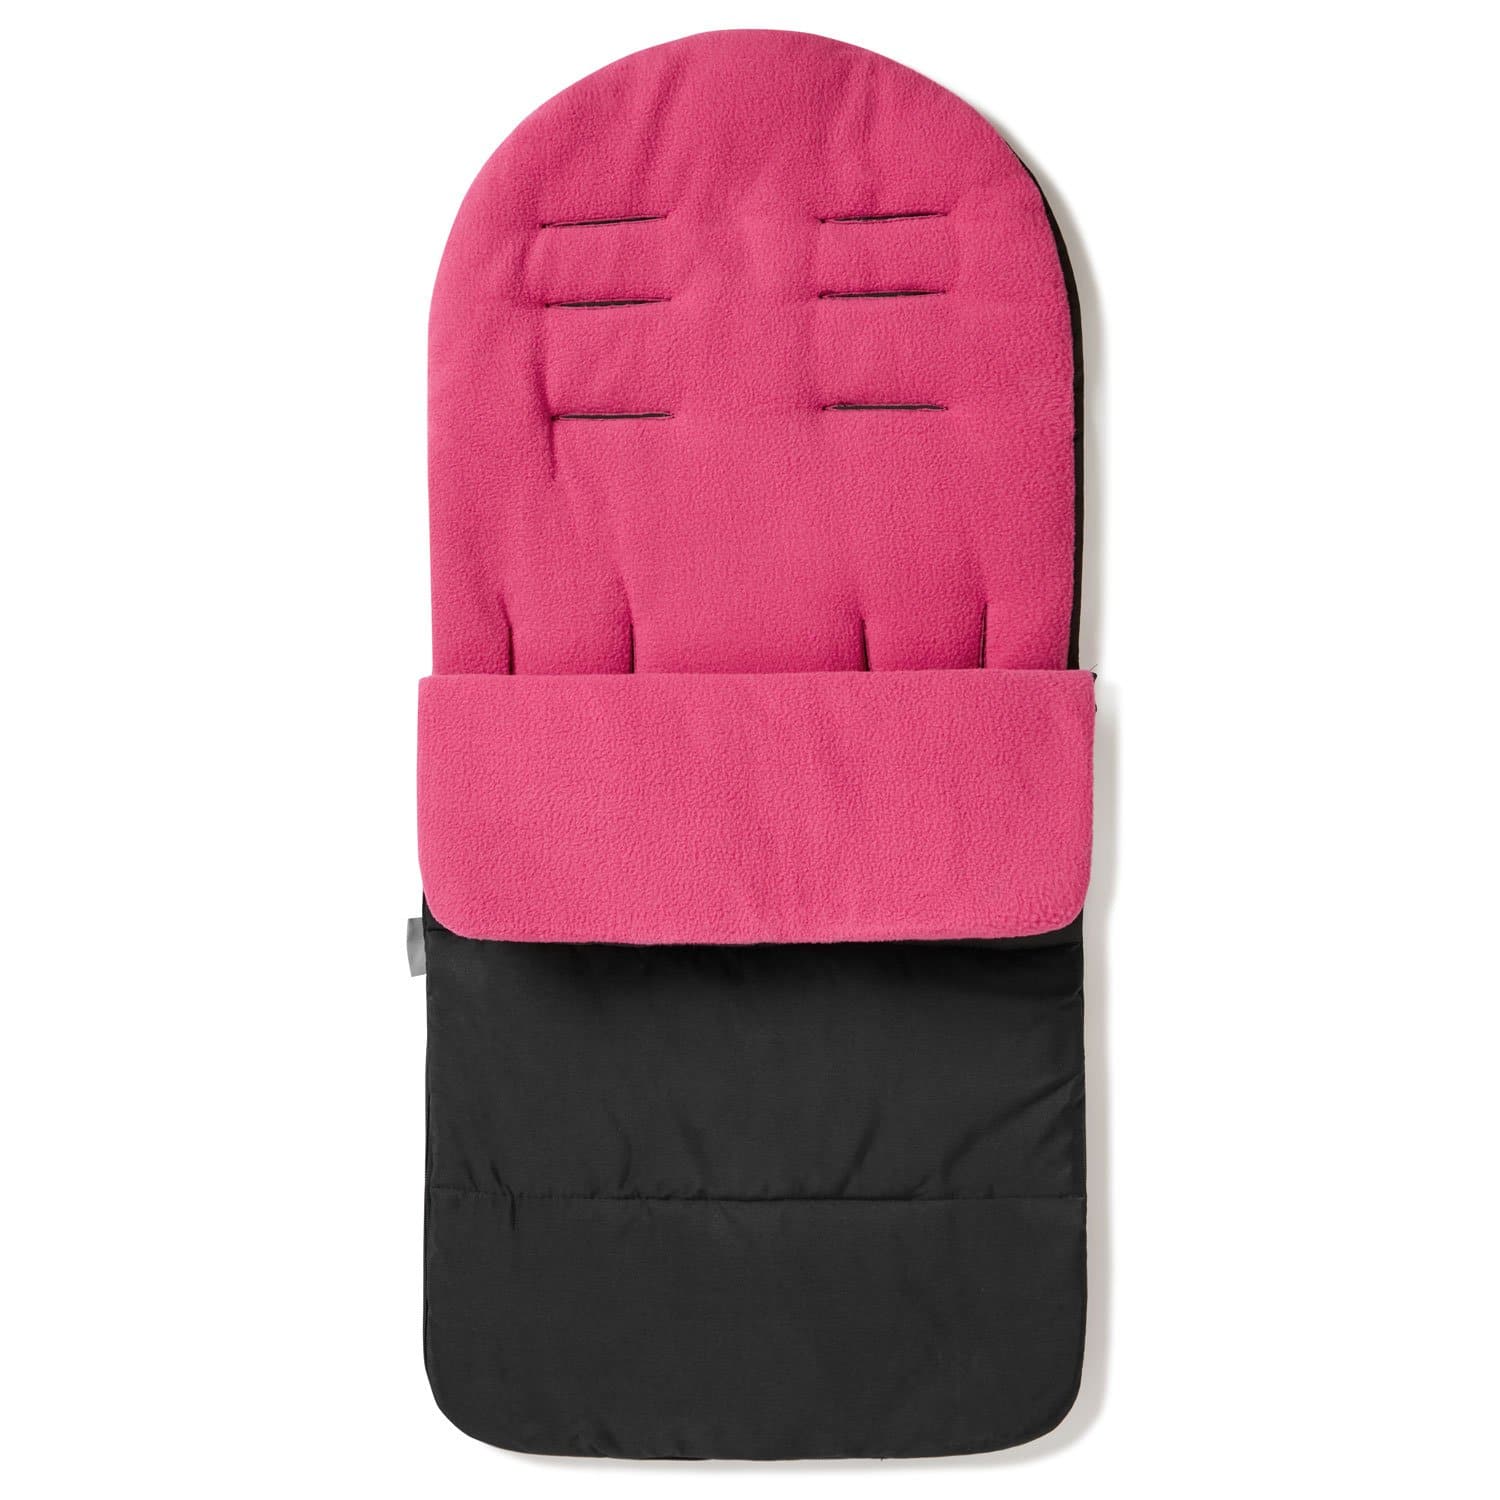 Premium Footmuff / Cosy Toes Compatible with Babybus - Pink Rose / Fits All Models | For Your Little One